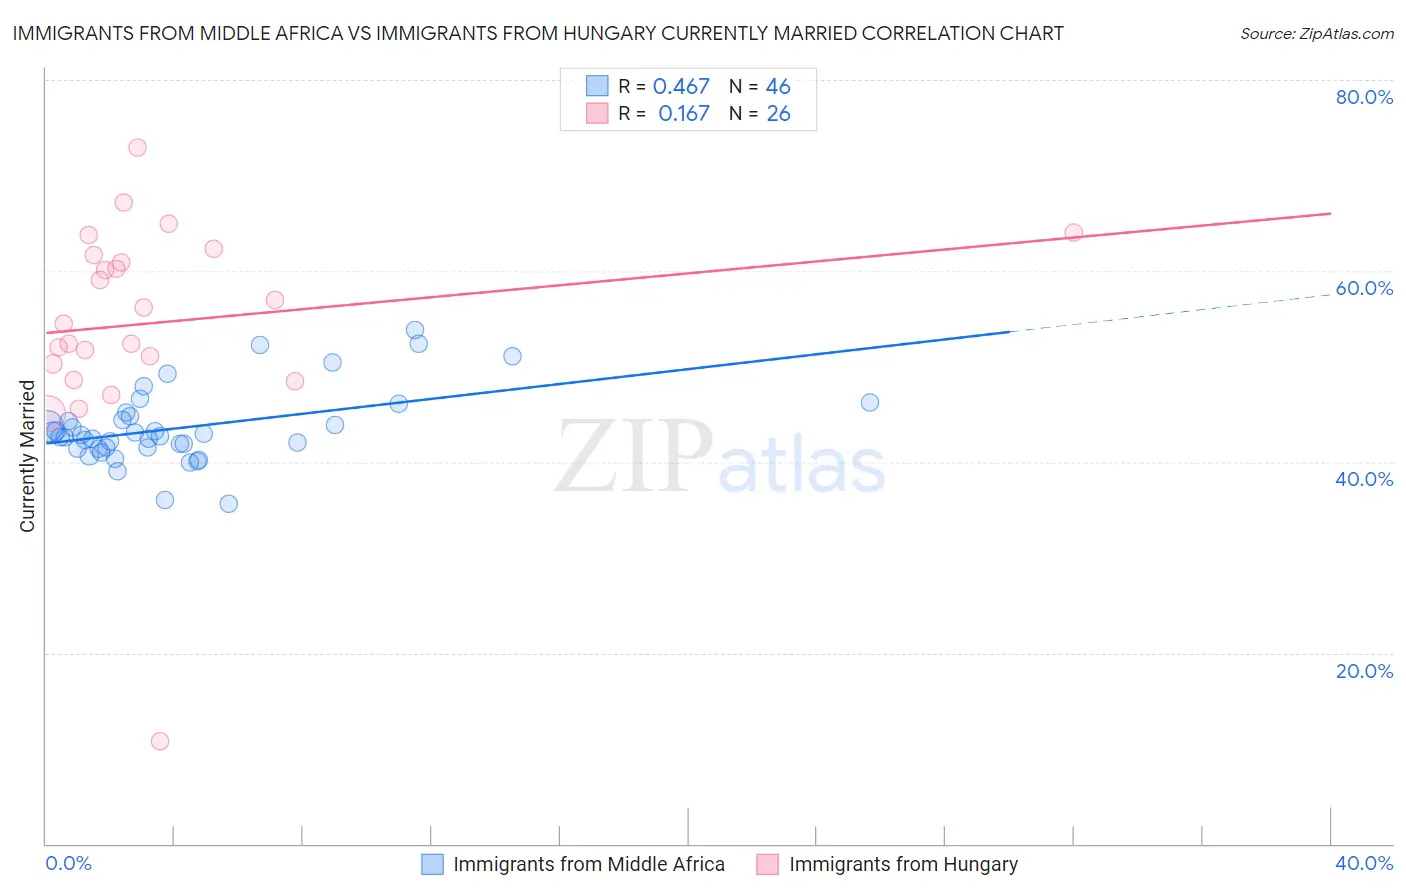 Immigrants from Middle Africa vs Immigrants from Hungary Currently Married